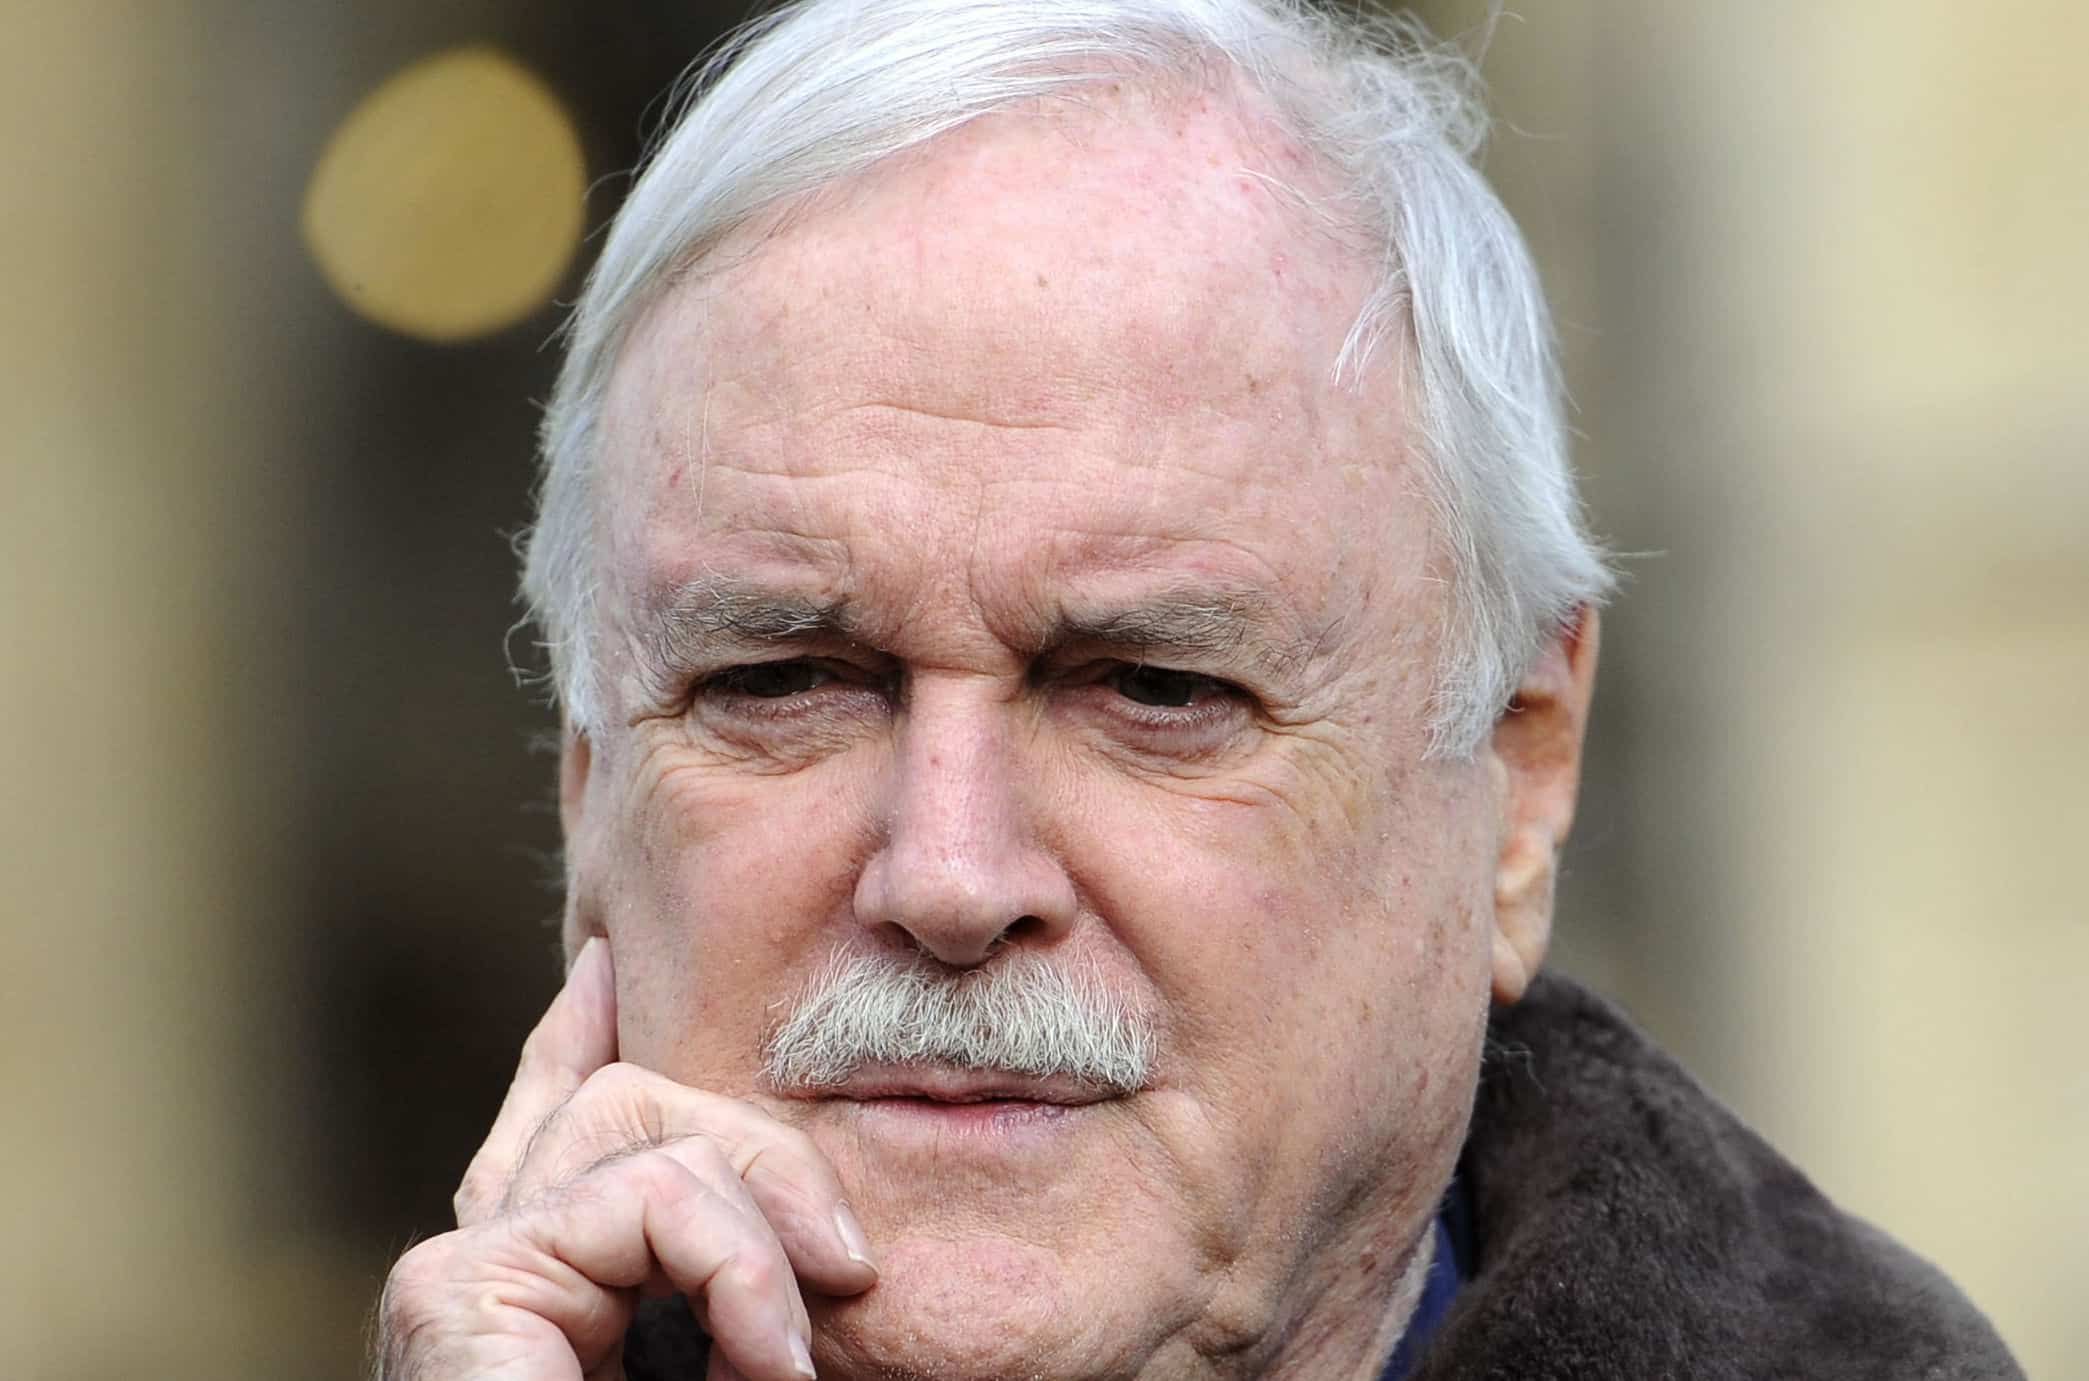 George Monbiot tackles John Cleese’s cancel culture argument in blistering thread